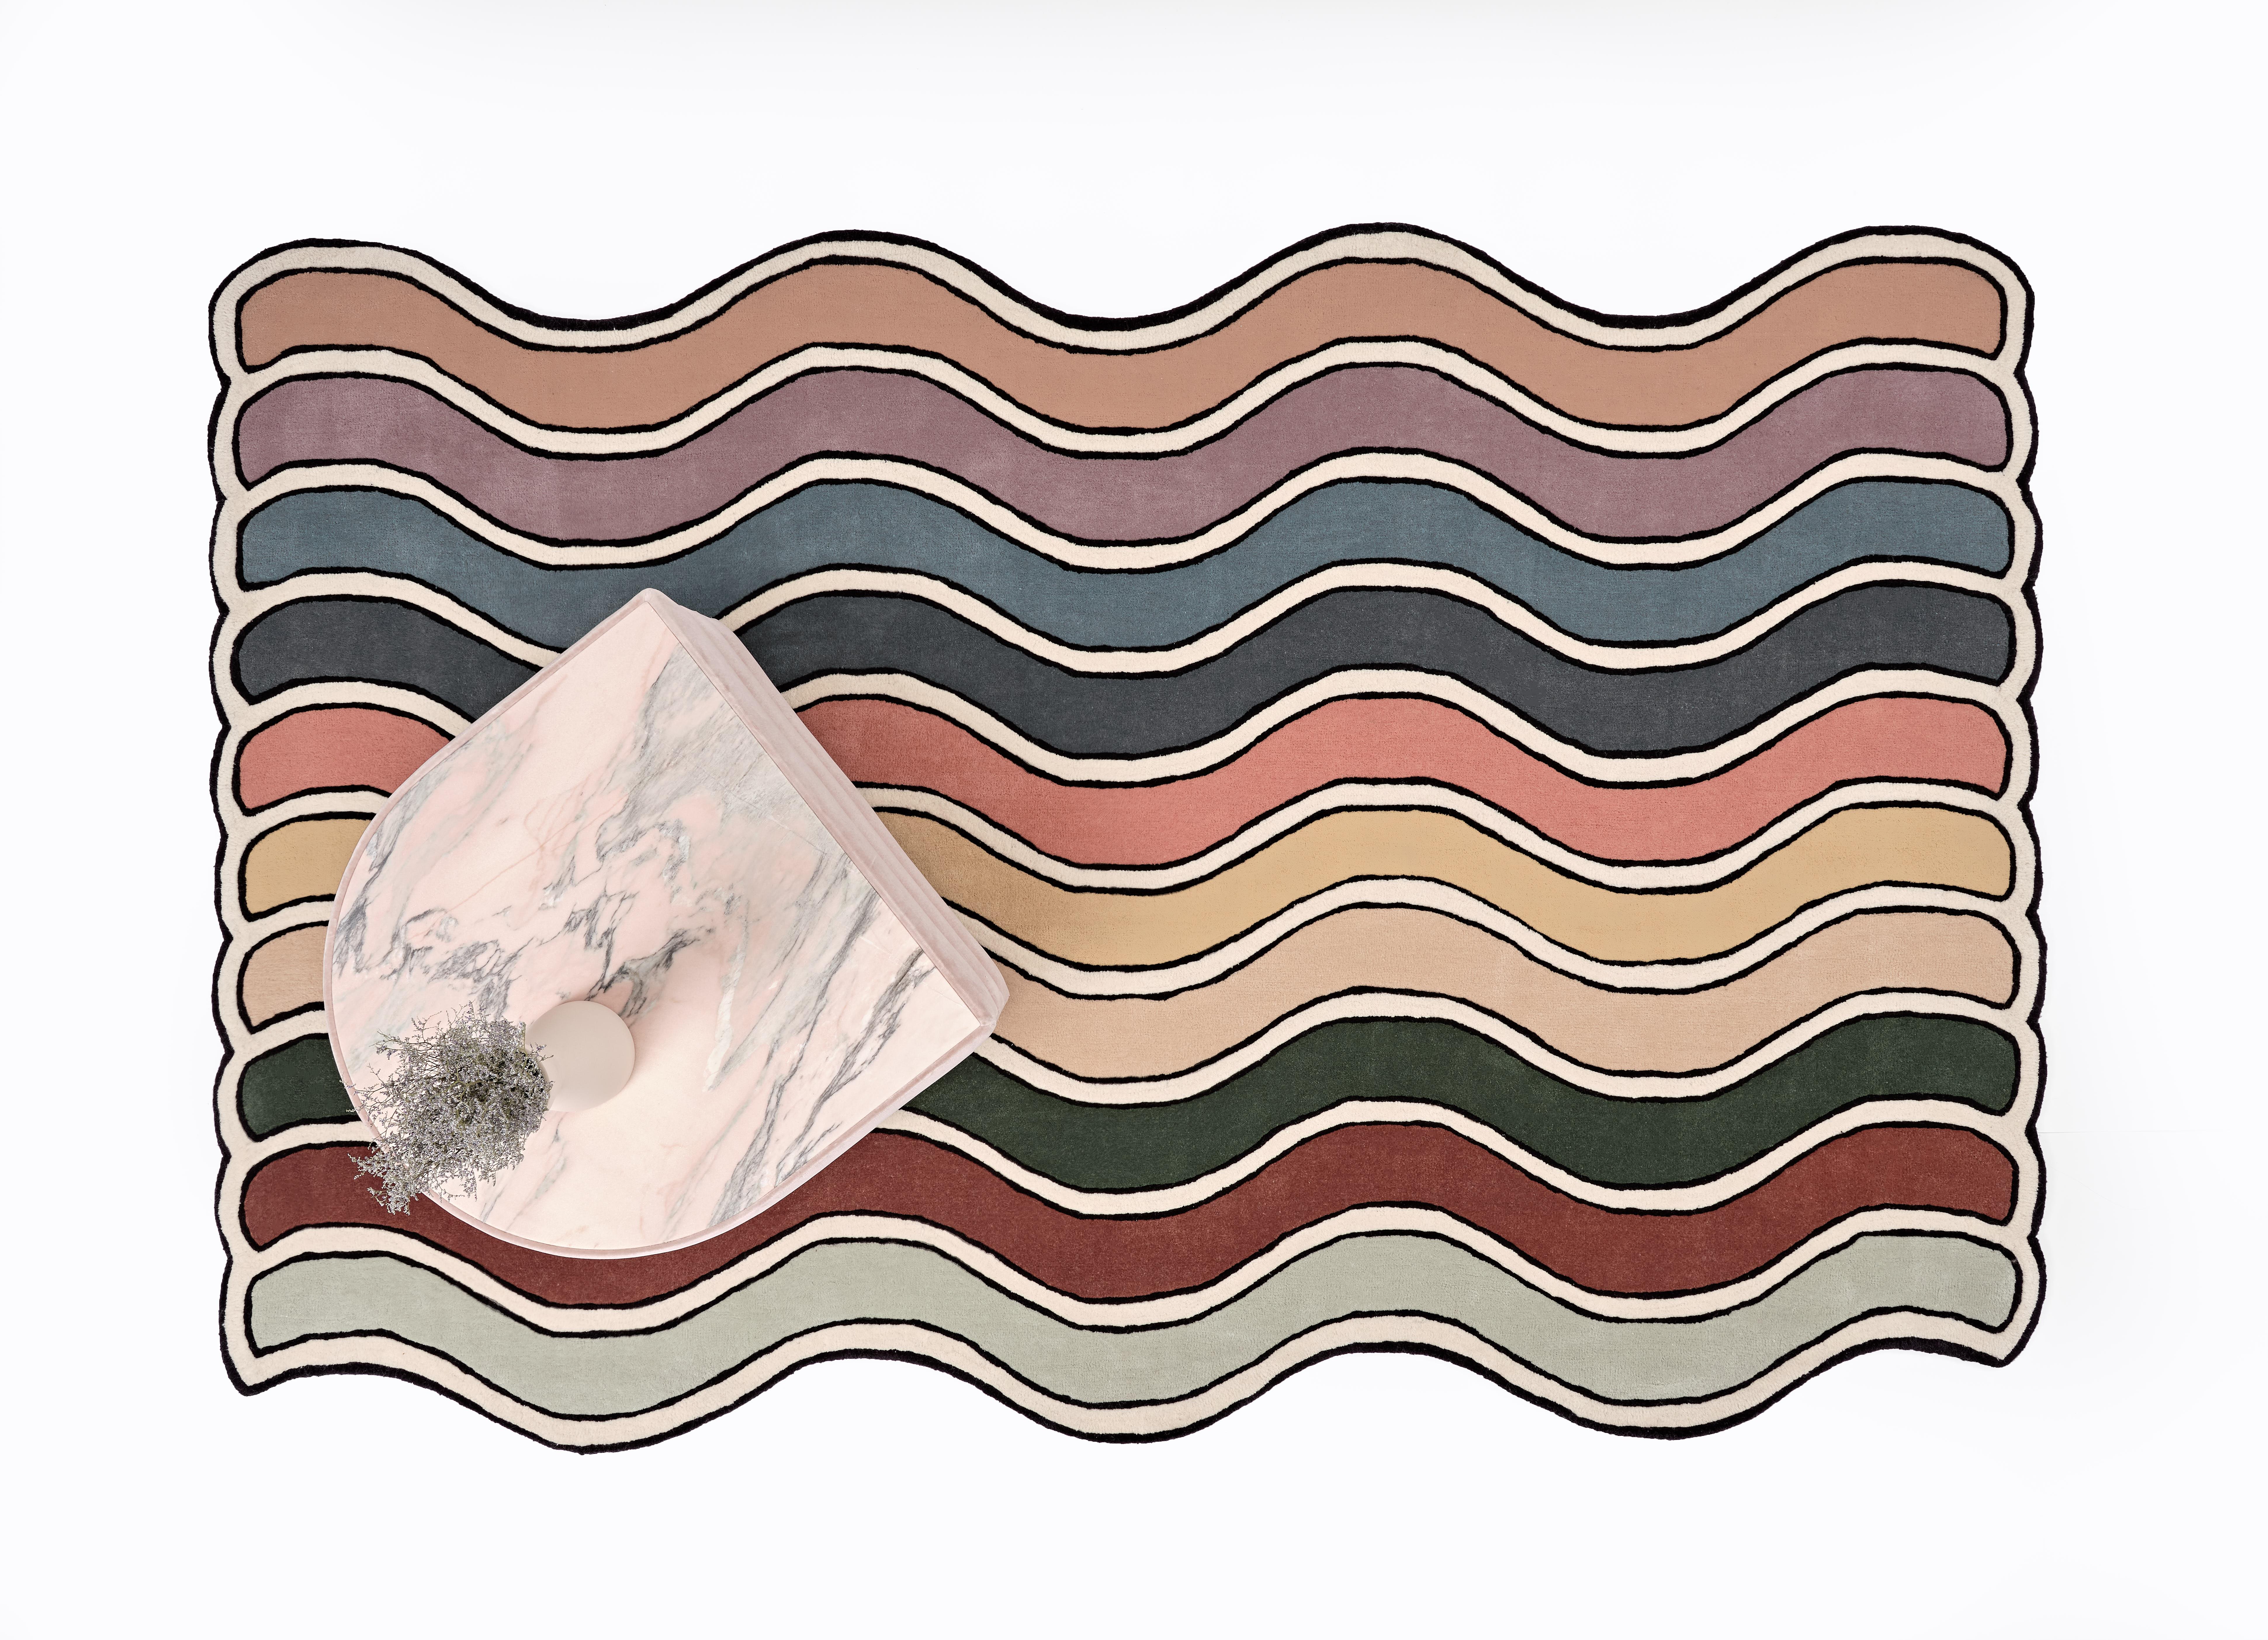 The Wavy rug is a series of rugs first exhibited in our pieces homes project in Kennebunk, Maine. The Wavy rug design concept started as a single rug composed of 10 multicolored, undulating stripes. From there we imagined how “snippets” of the rug